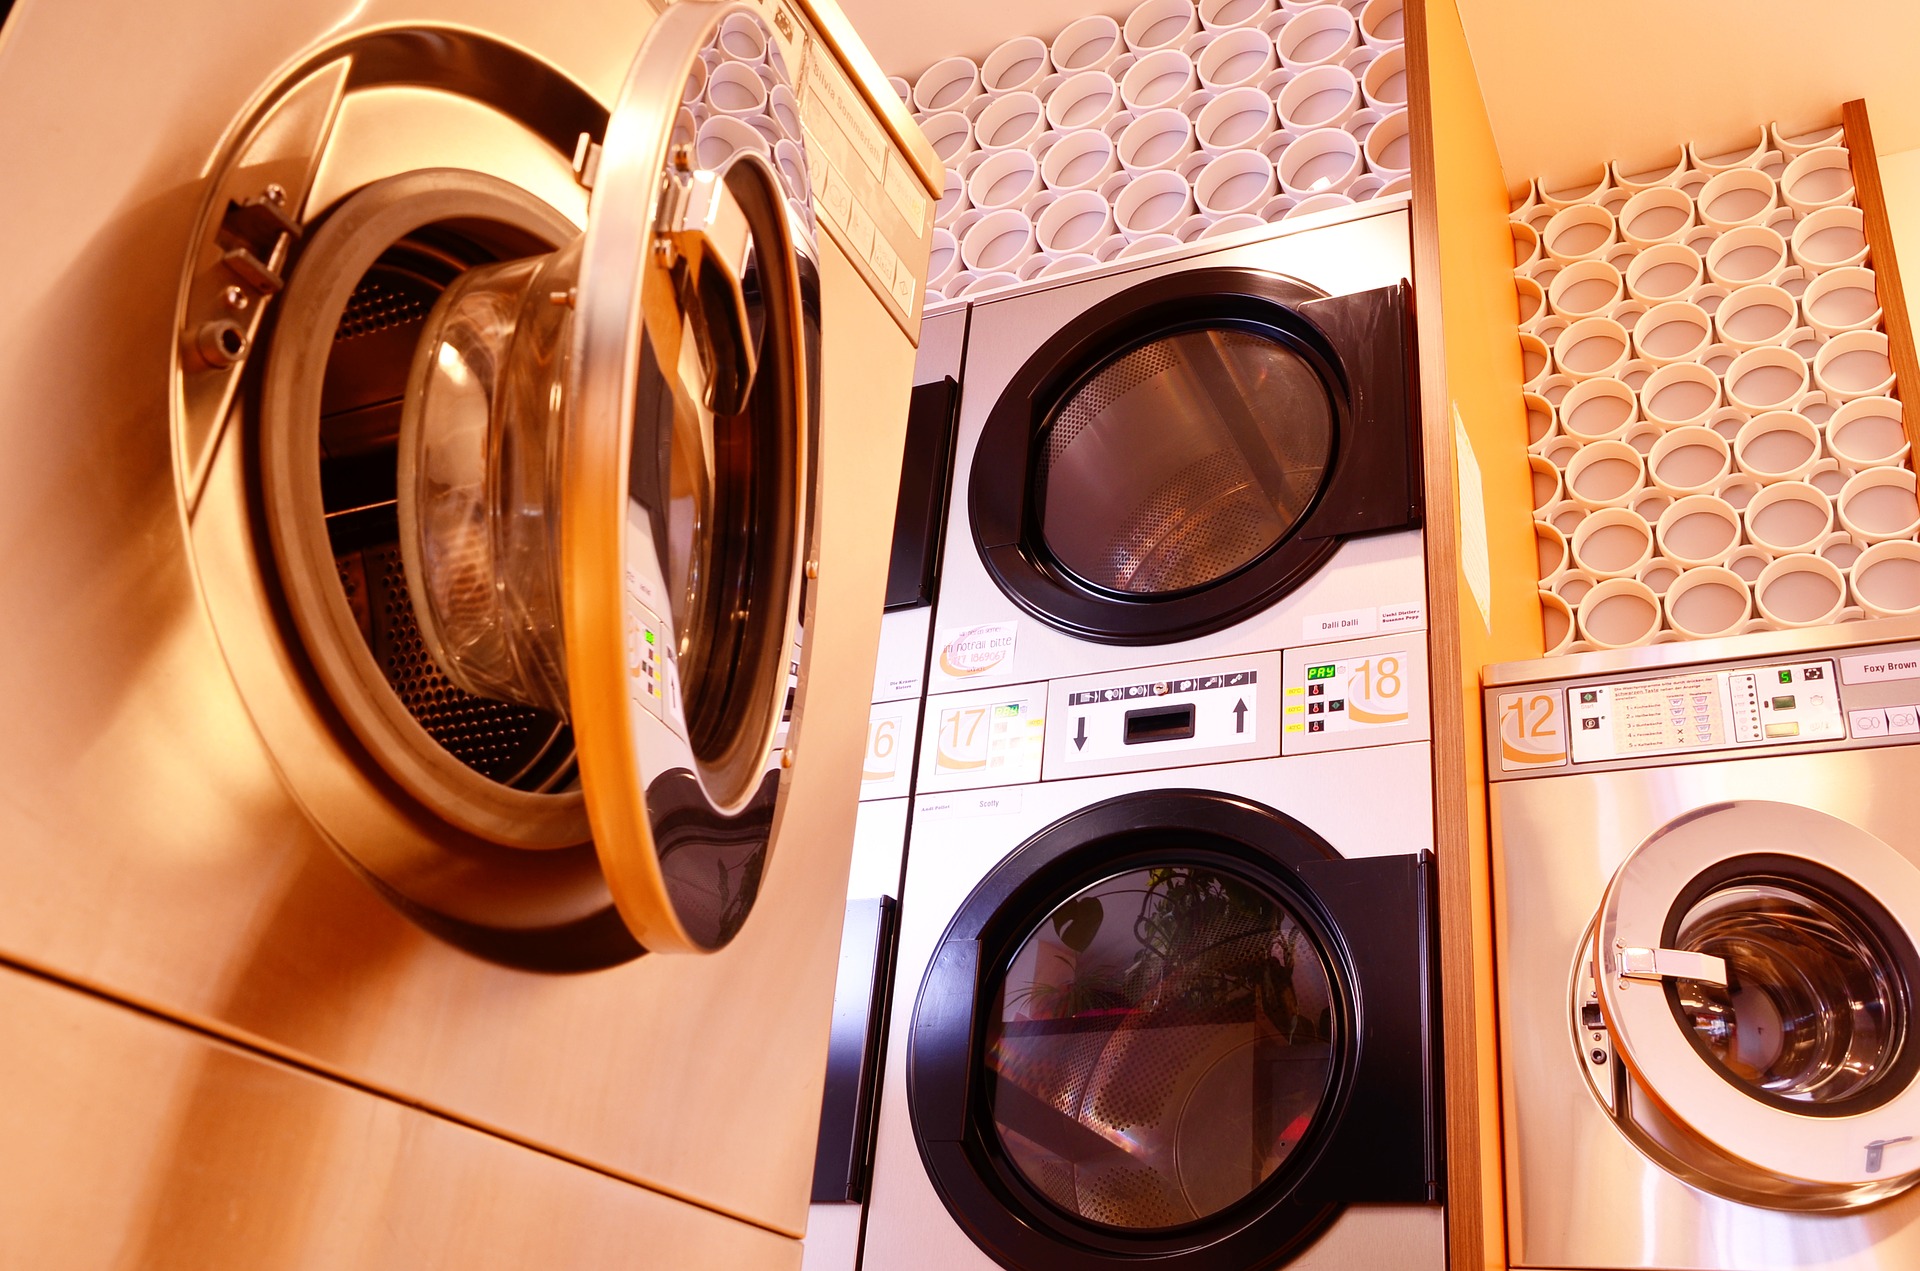 Dry cleaning and laundry services